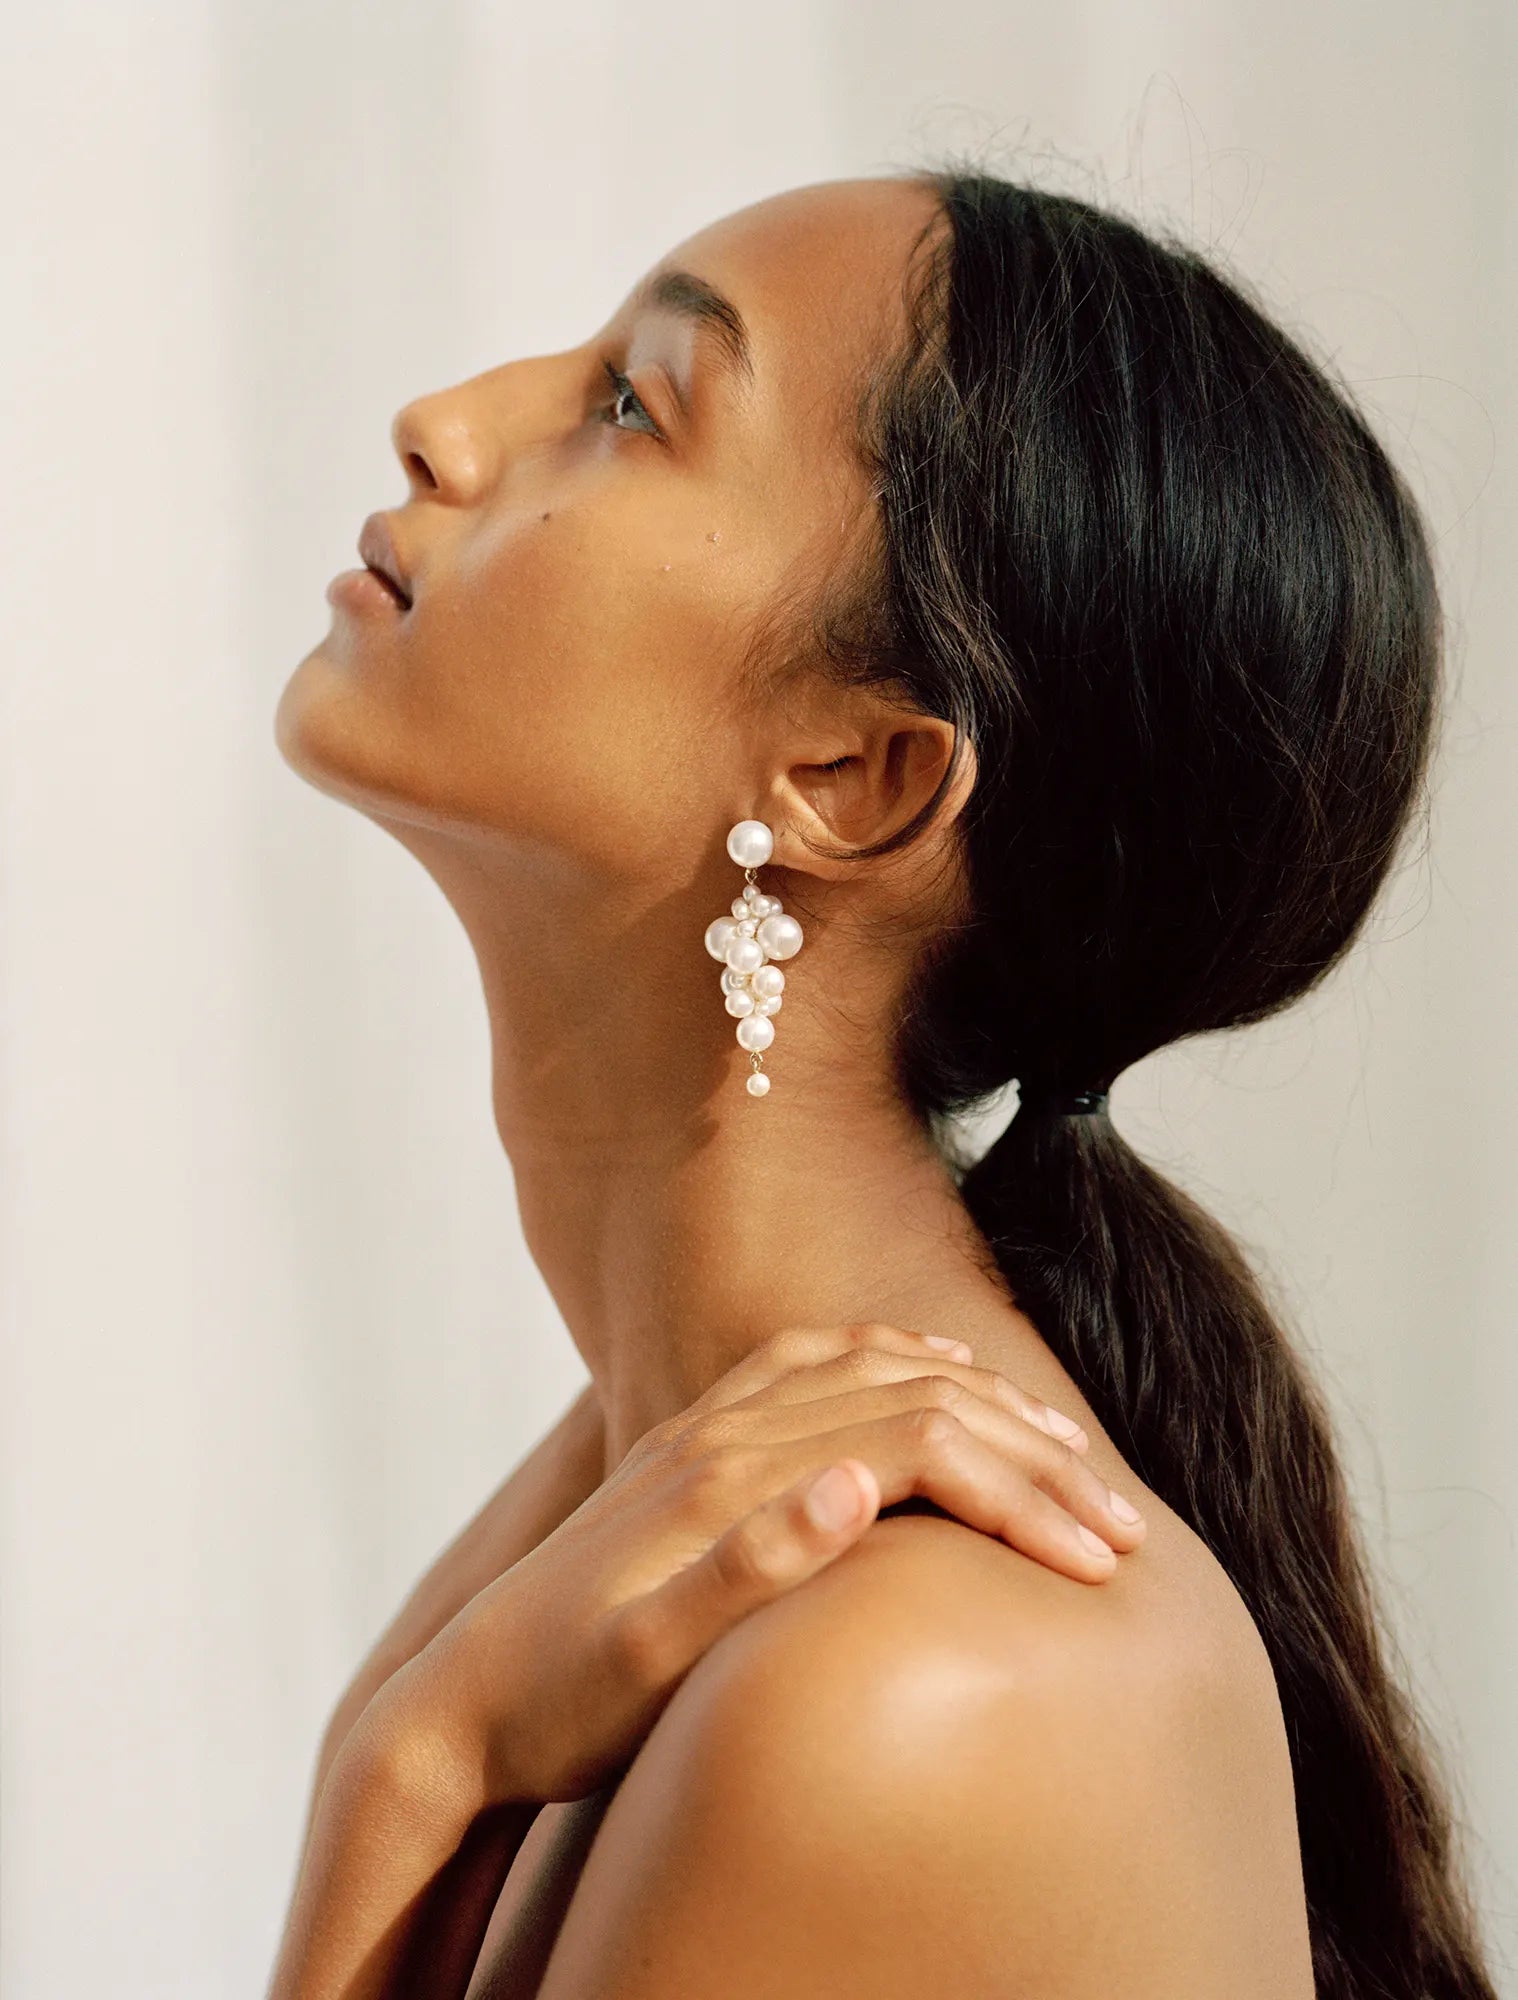 Model wearing Sienna earrings which are handmade in 14K yellow gold with freshwater pearls 